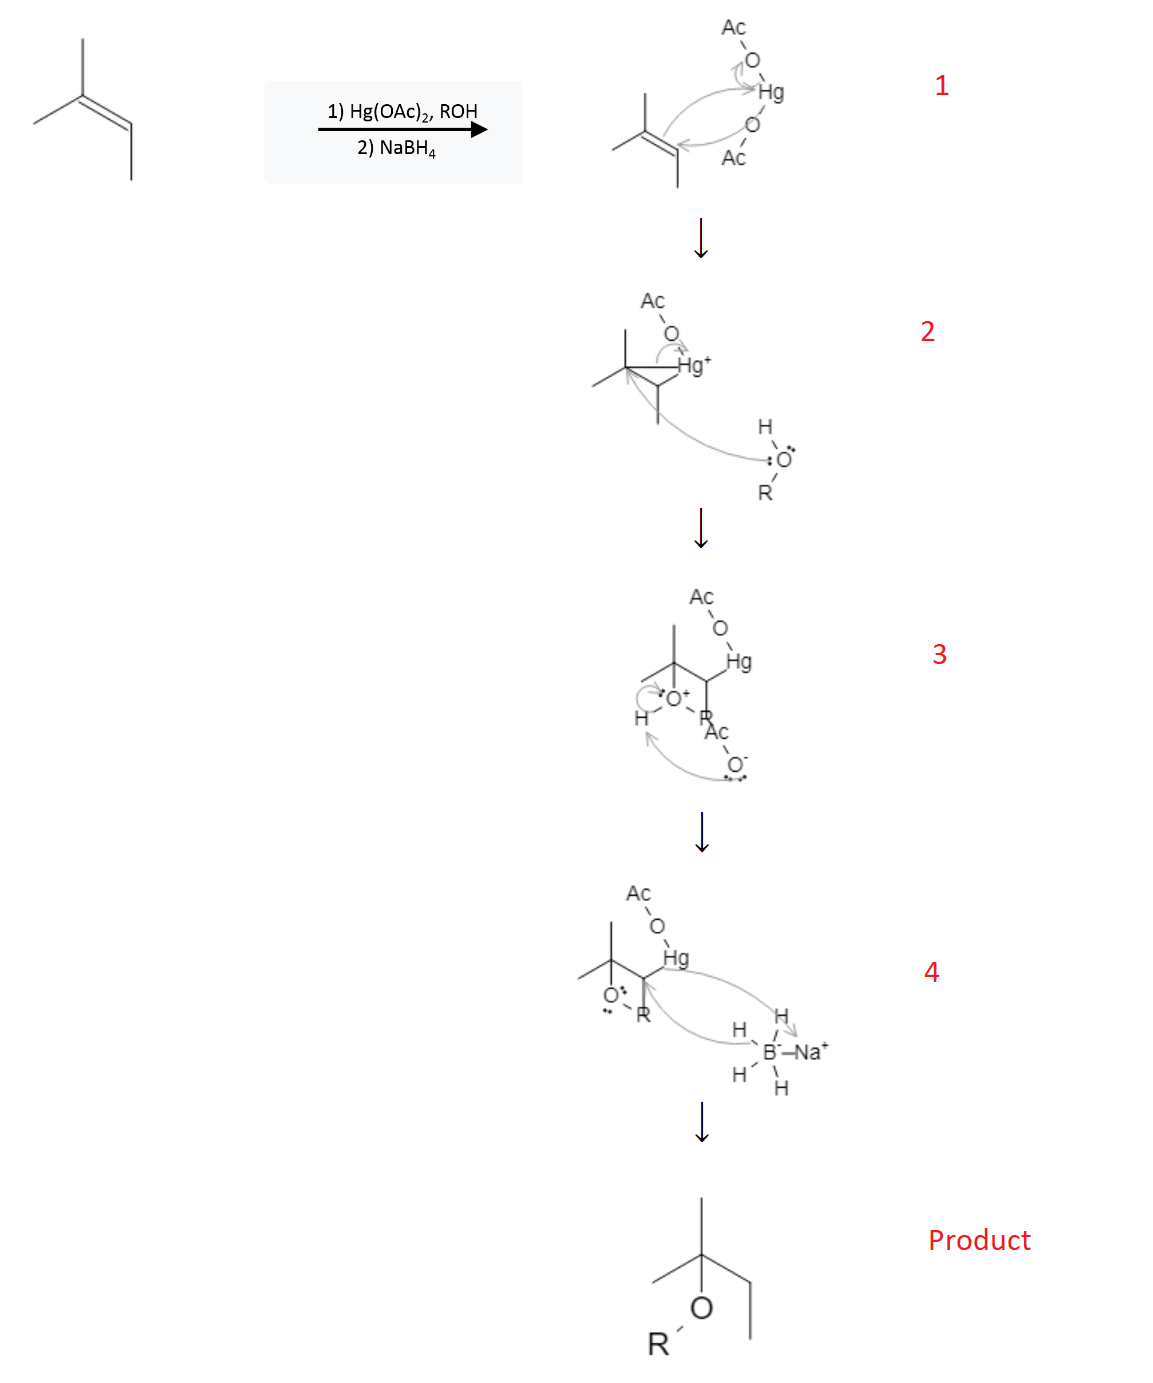 Alkene Reactions: Oxymercuration of Alkenes using Hg(OAc)2, alcohol, and NaBH4 - image3